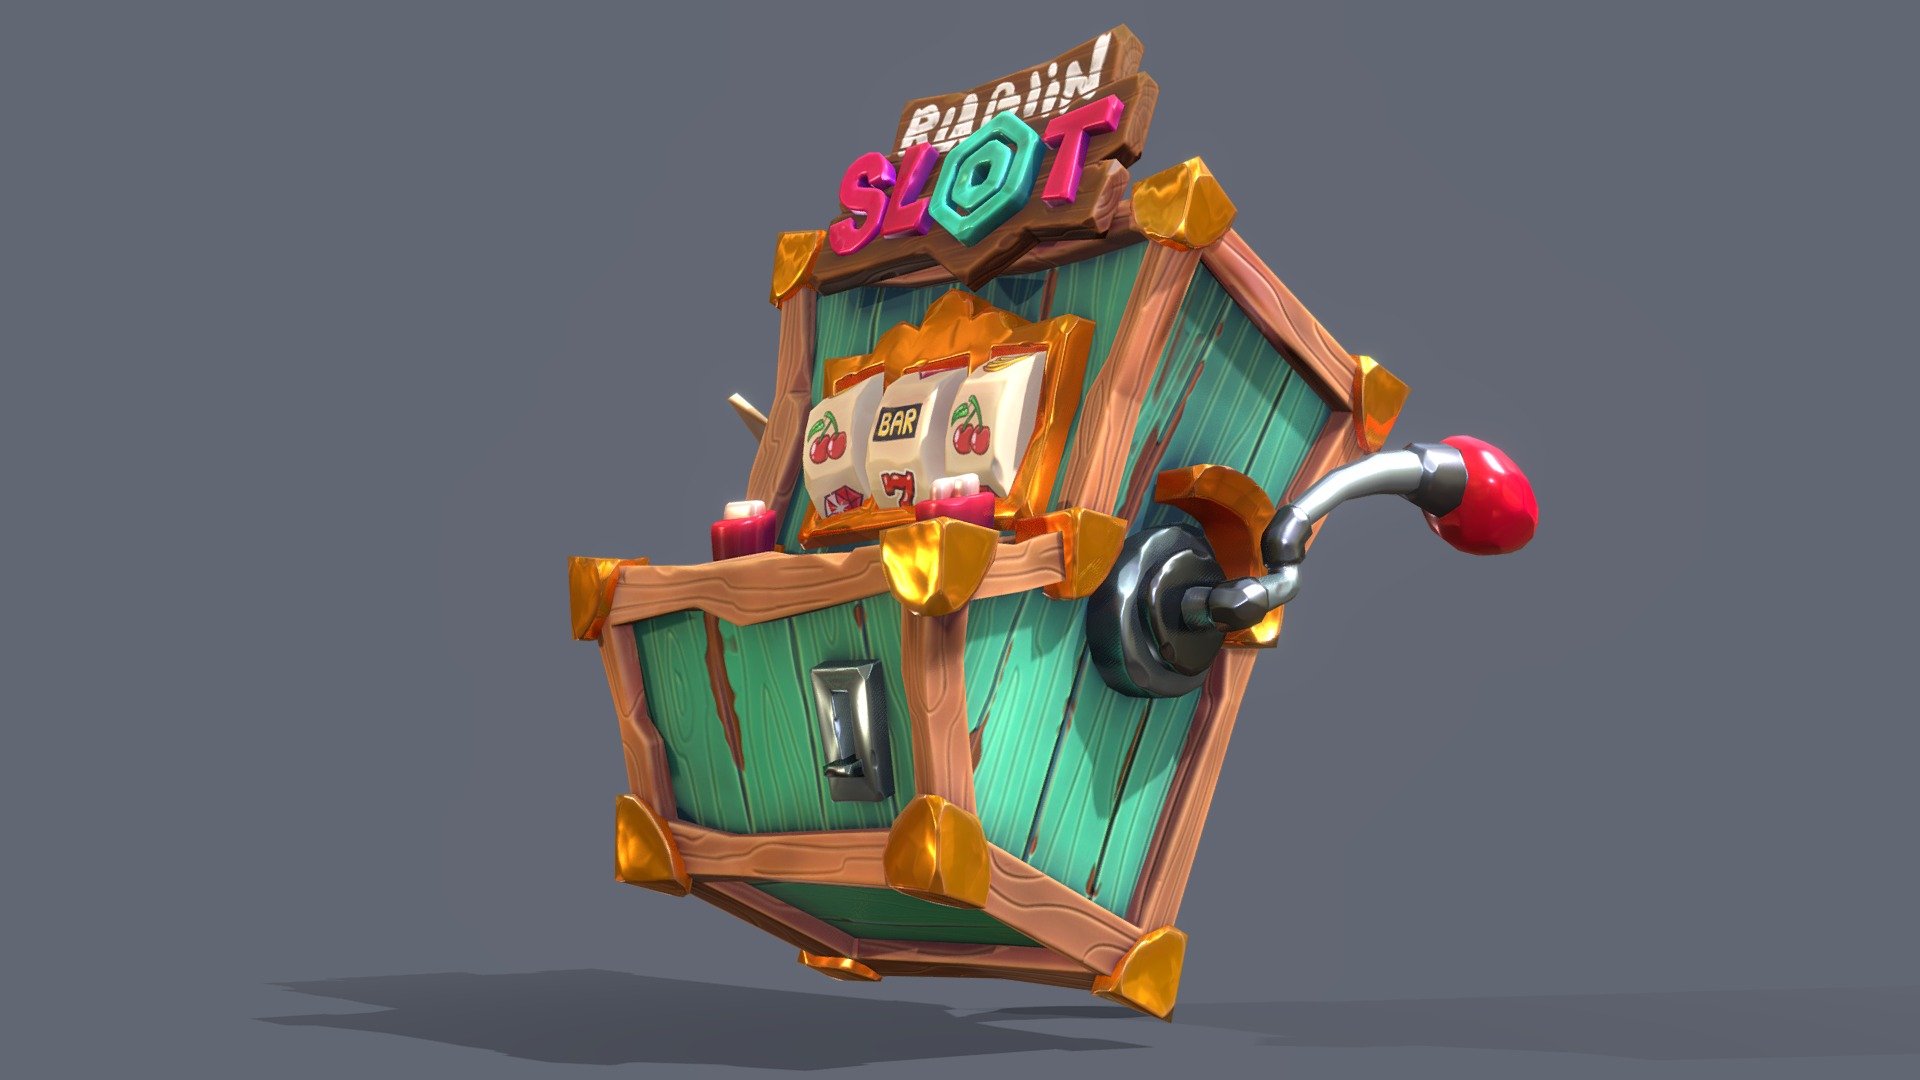 Stylized Alive Slot Machine, animated with smearing technique achieved through the transfer of the Flex modifier effect from 3ds max - This Slot Machine is Alive!!! - 3D model by Vladimir Abashin (@UncleV89) 3d model